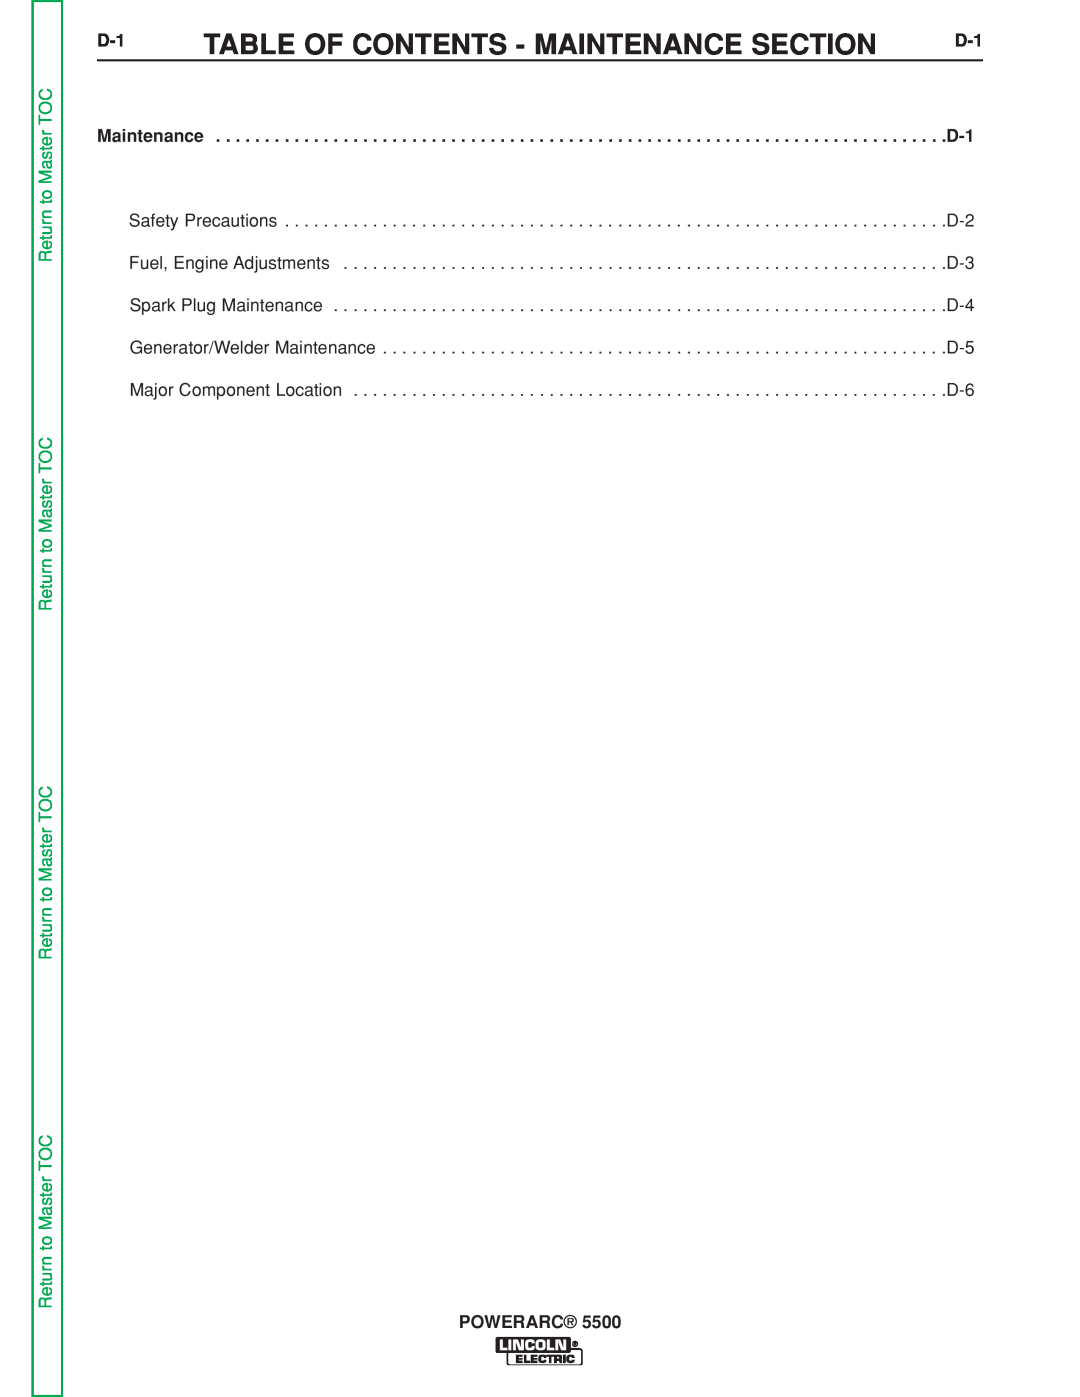 Lincoln Electric SVM197-A service manual Table Of Contents - Maintenance Section, Return to Master TOC, Powerarc 